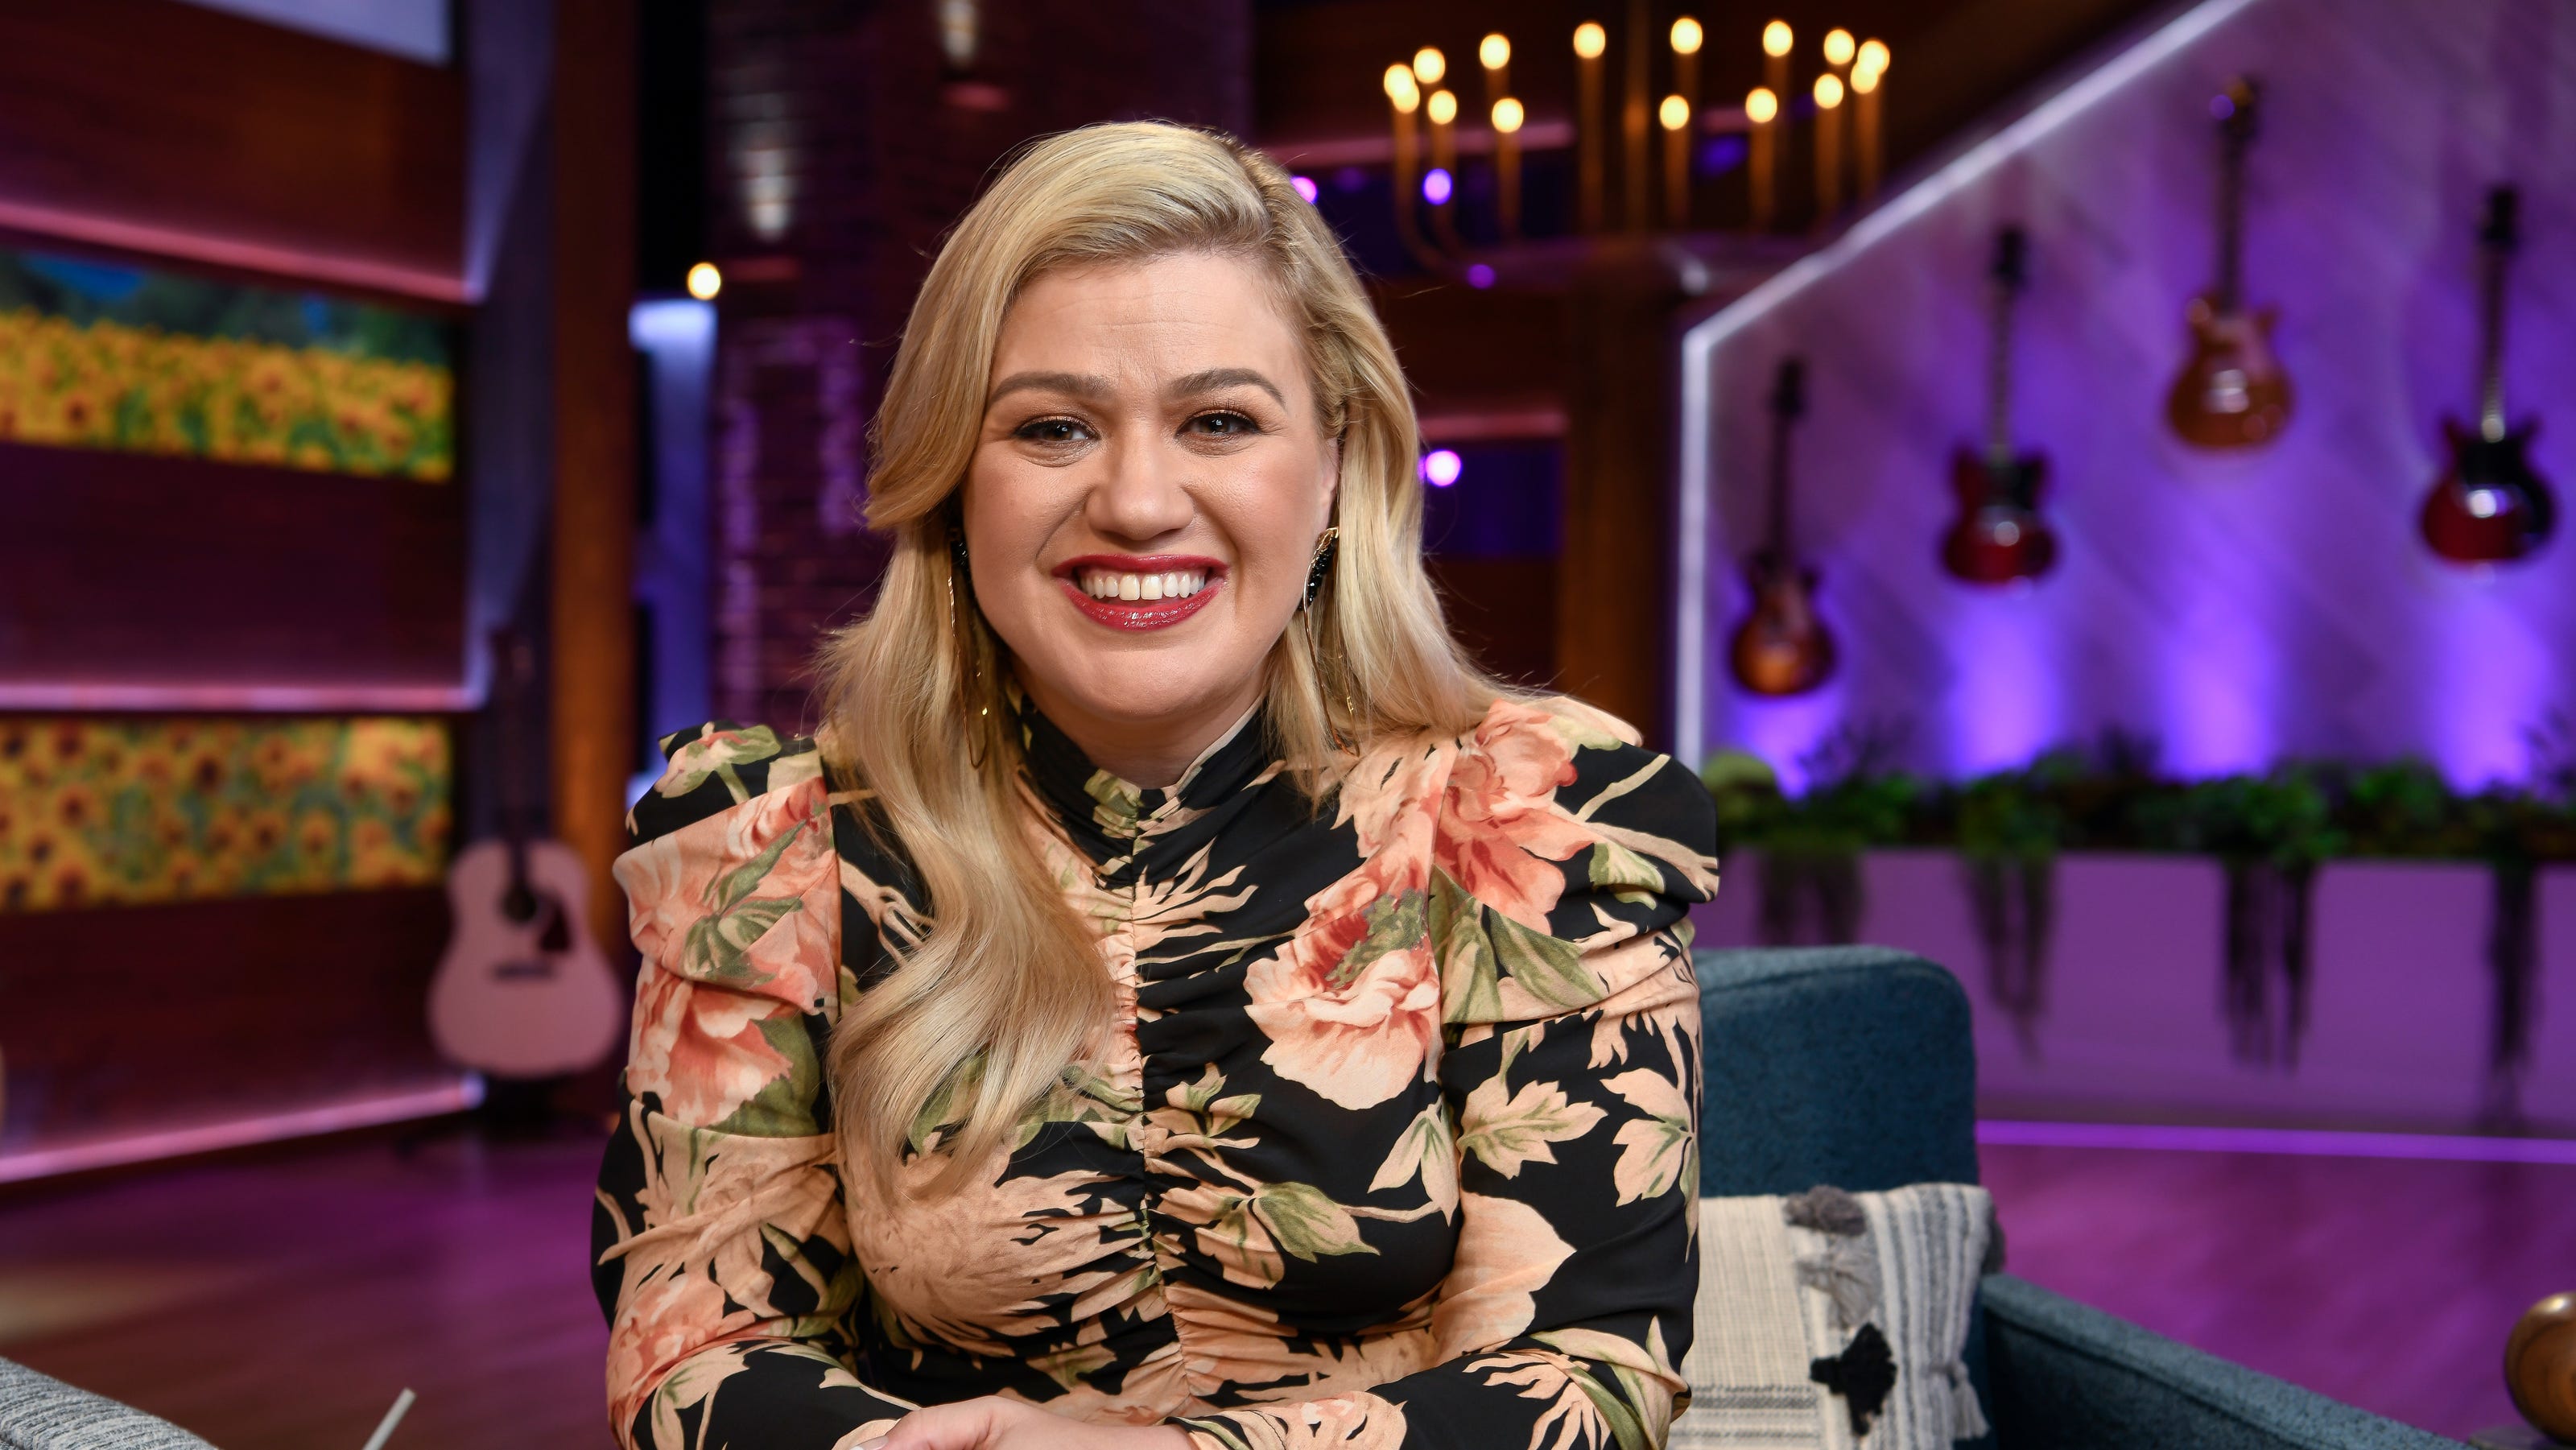 Kelly Clarkson pledges to eradicate 'any notion of toxicity' after criticism of show's work culture